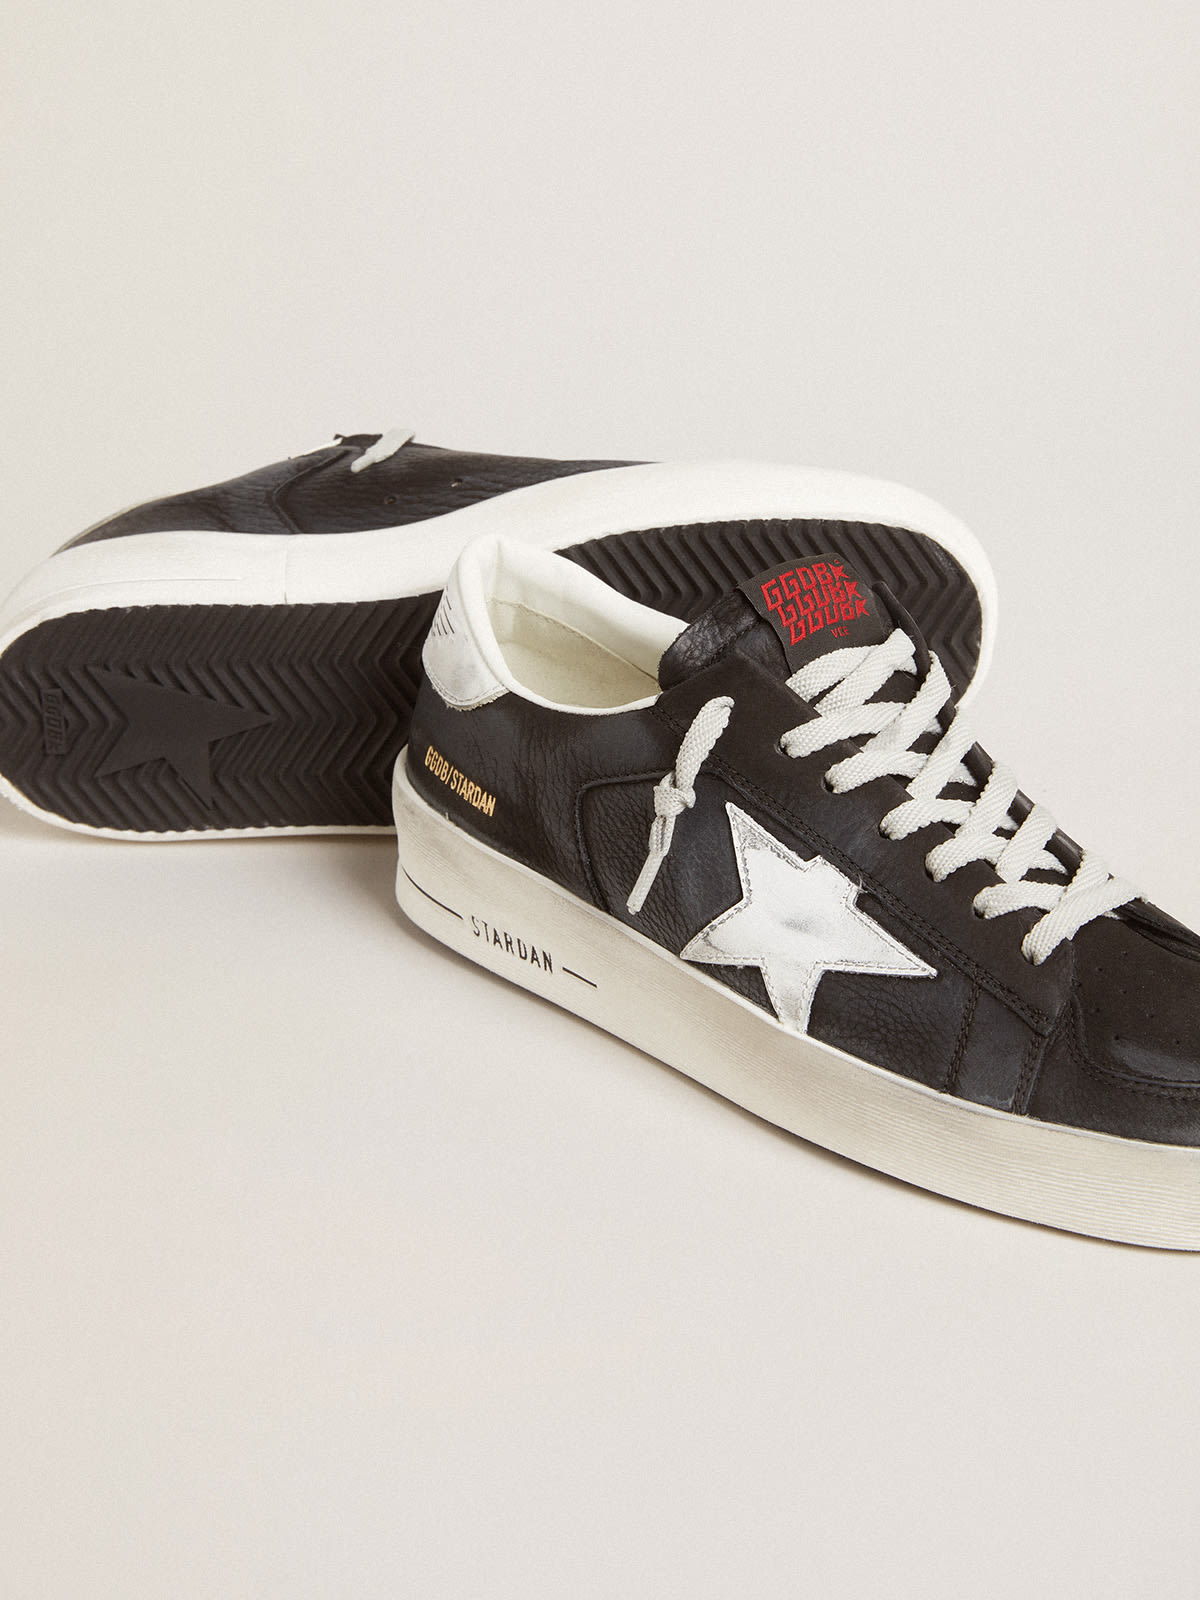 Golden Goose - Stardan in black nubuck and mesh with gray leather star and heel tab in 